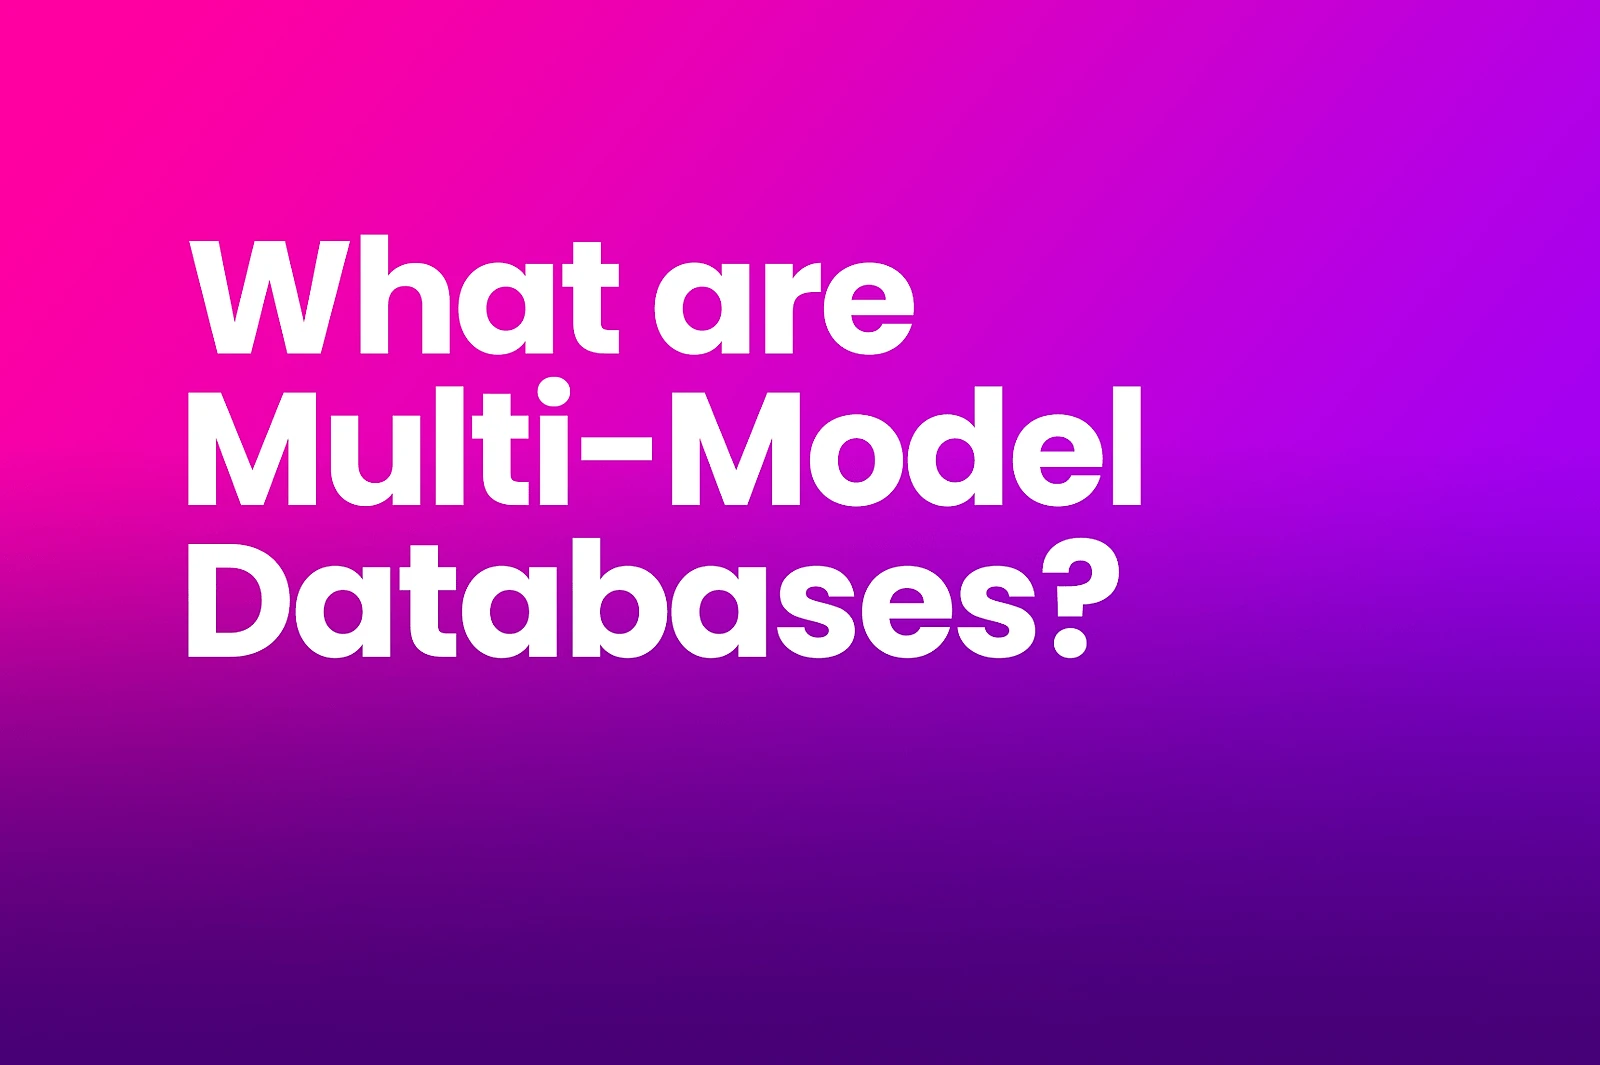 What are Multi-Model Databases?